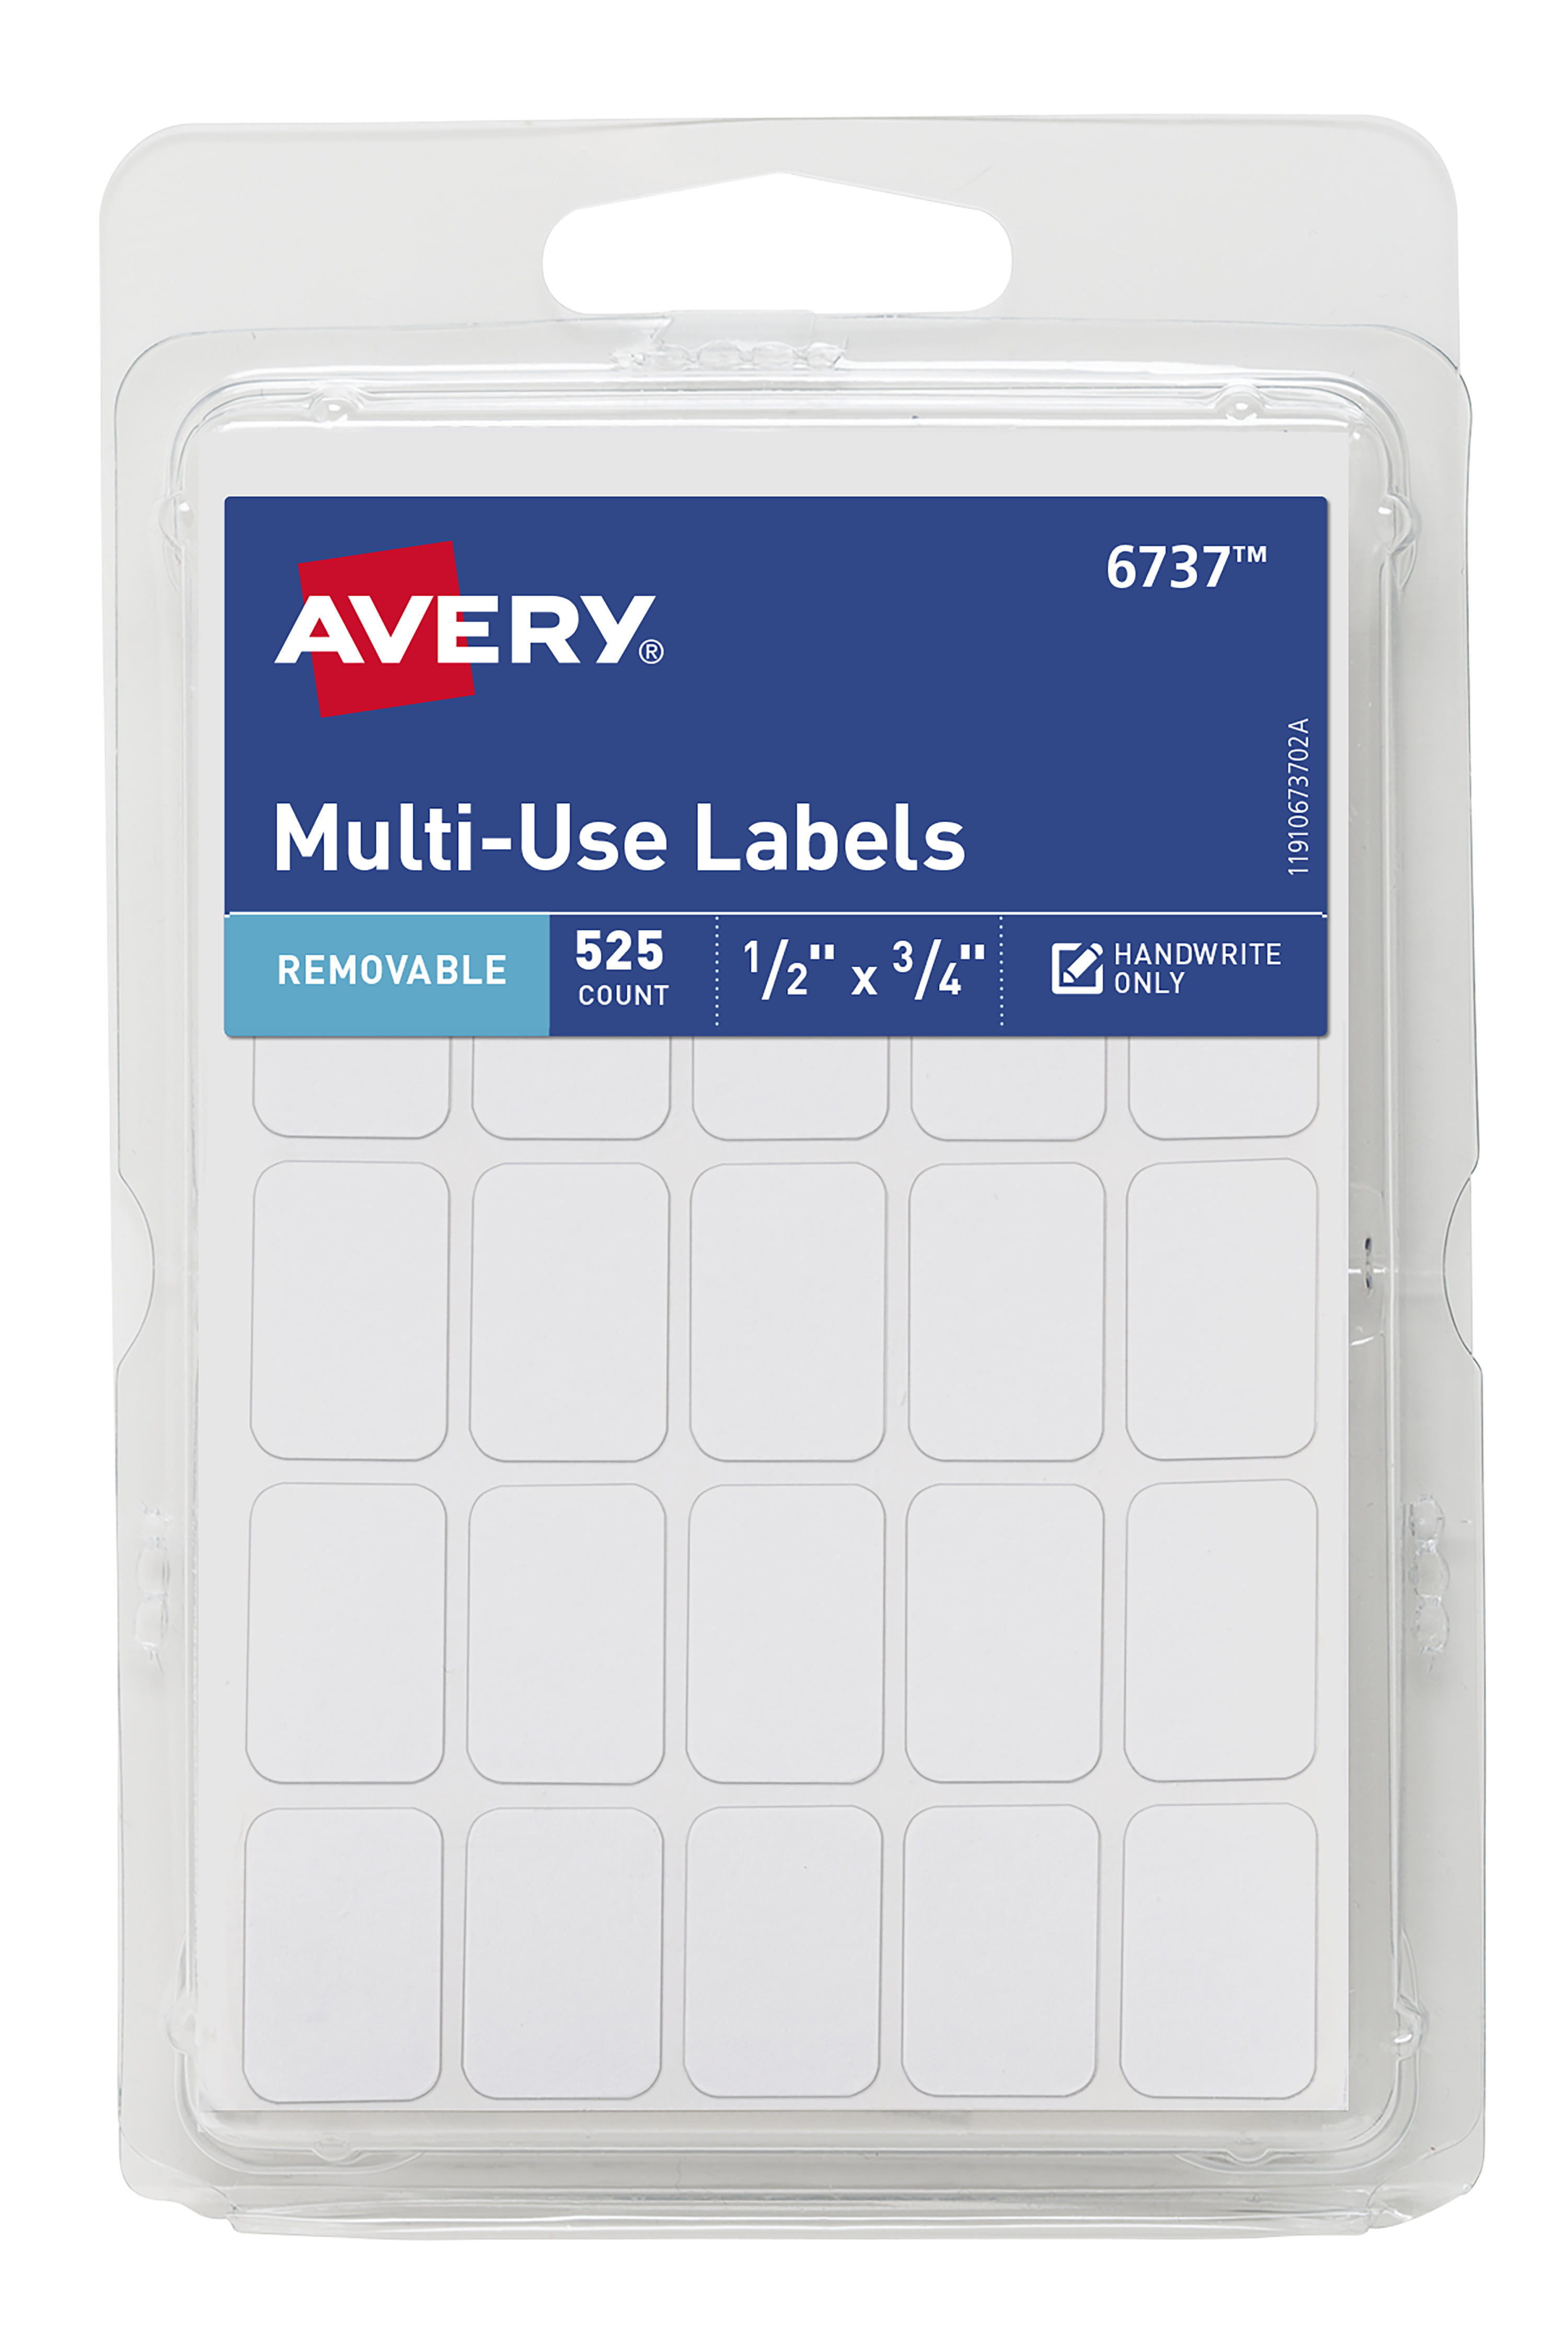 Avery Removable Labels, 1/2" x 3/4", 525 Total (6737)